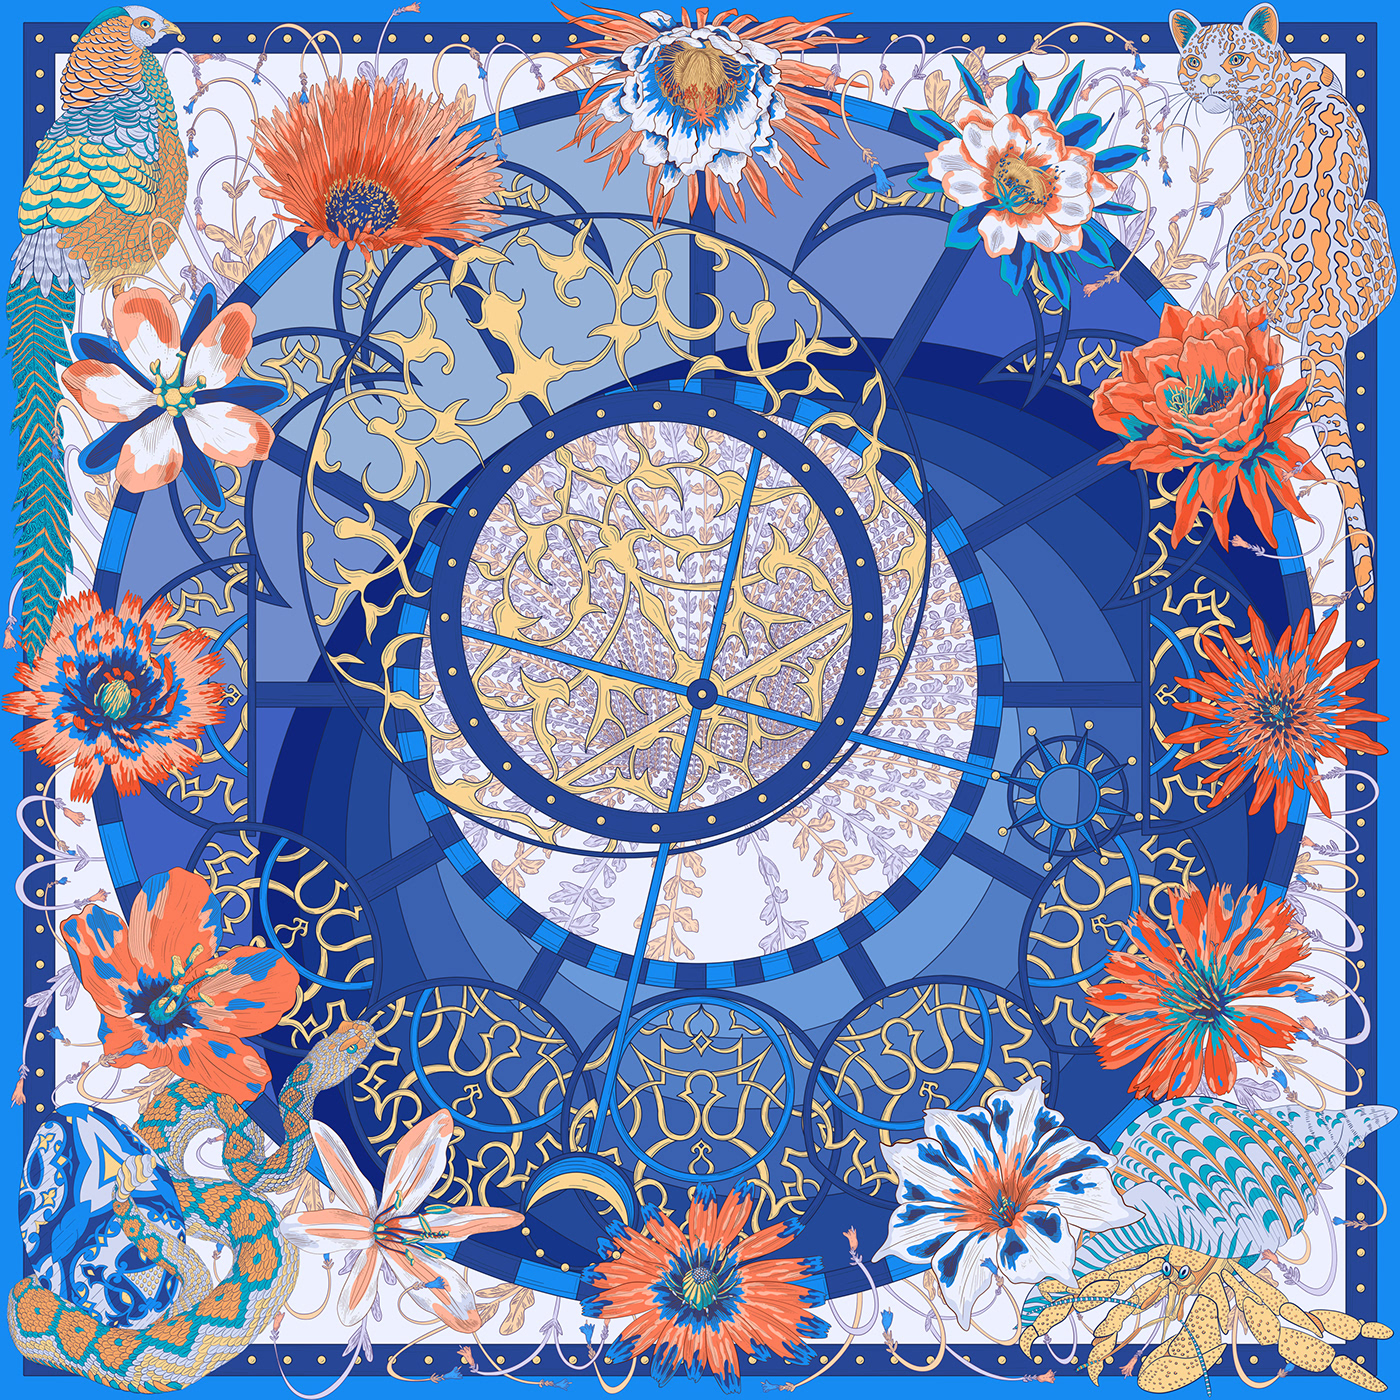 Digital square scarf illustration of a large blue flower clock with animals sitting in each corner.